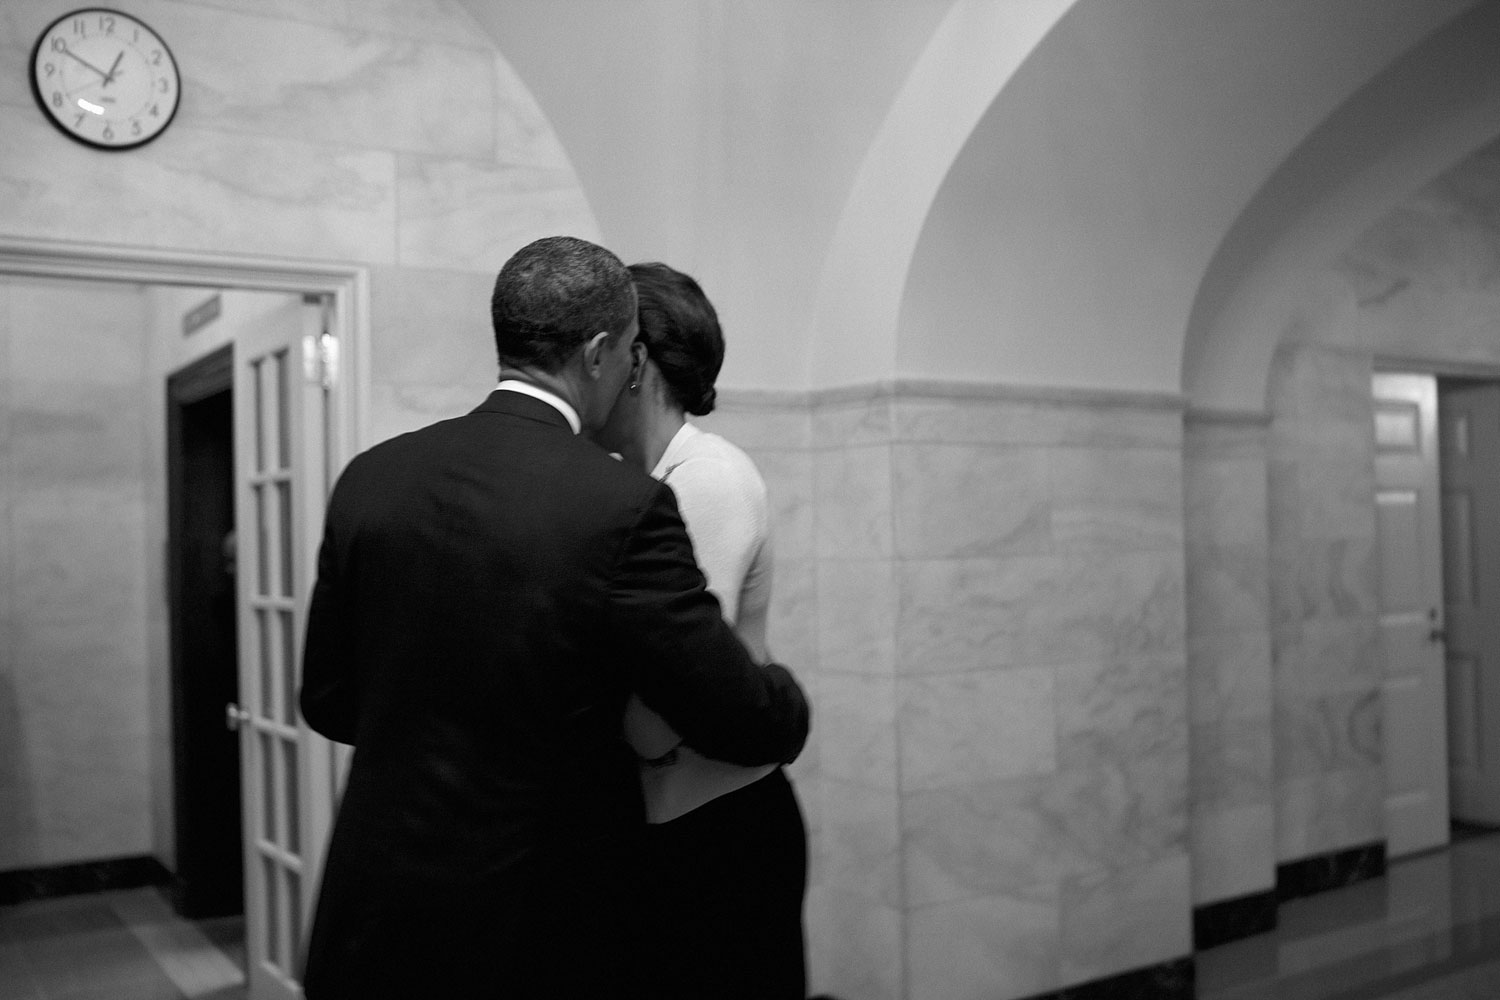 January 17, 2012. Barack Obama runs into Michelle unexpectedly and gives her a kiss on her 48th birthday.